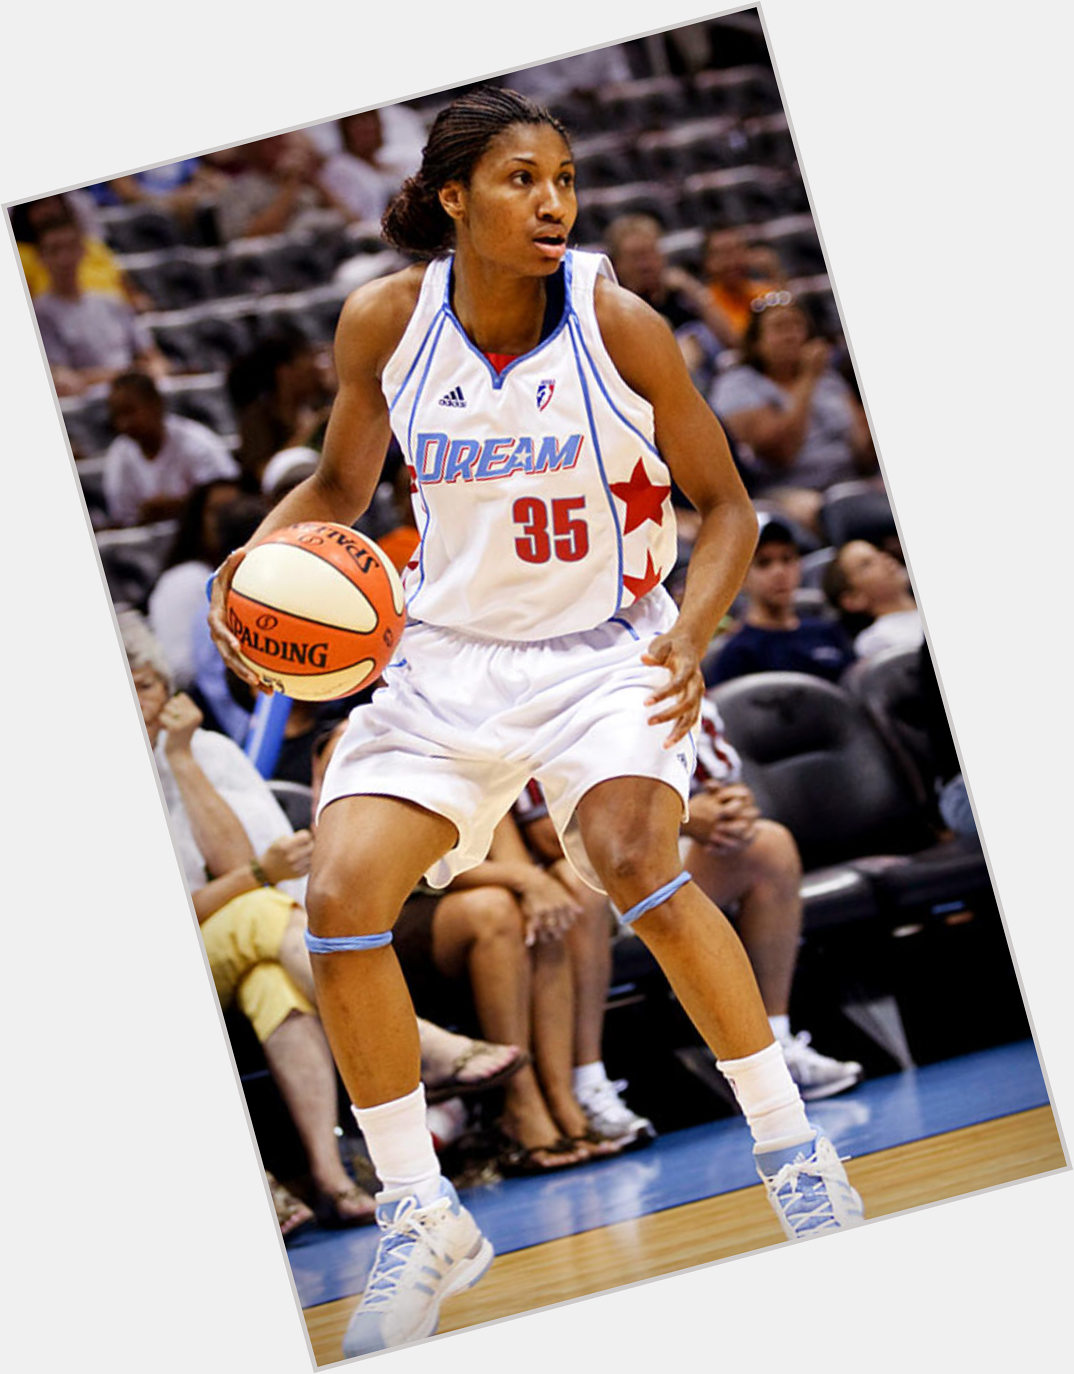 Angel Mccoughtry hairstyle 6